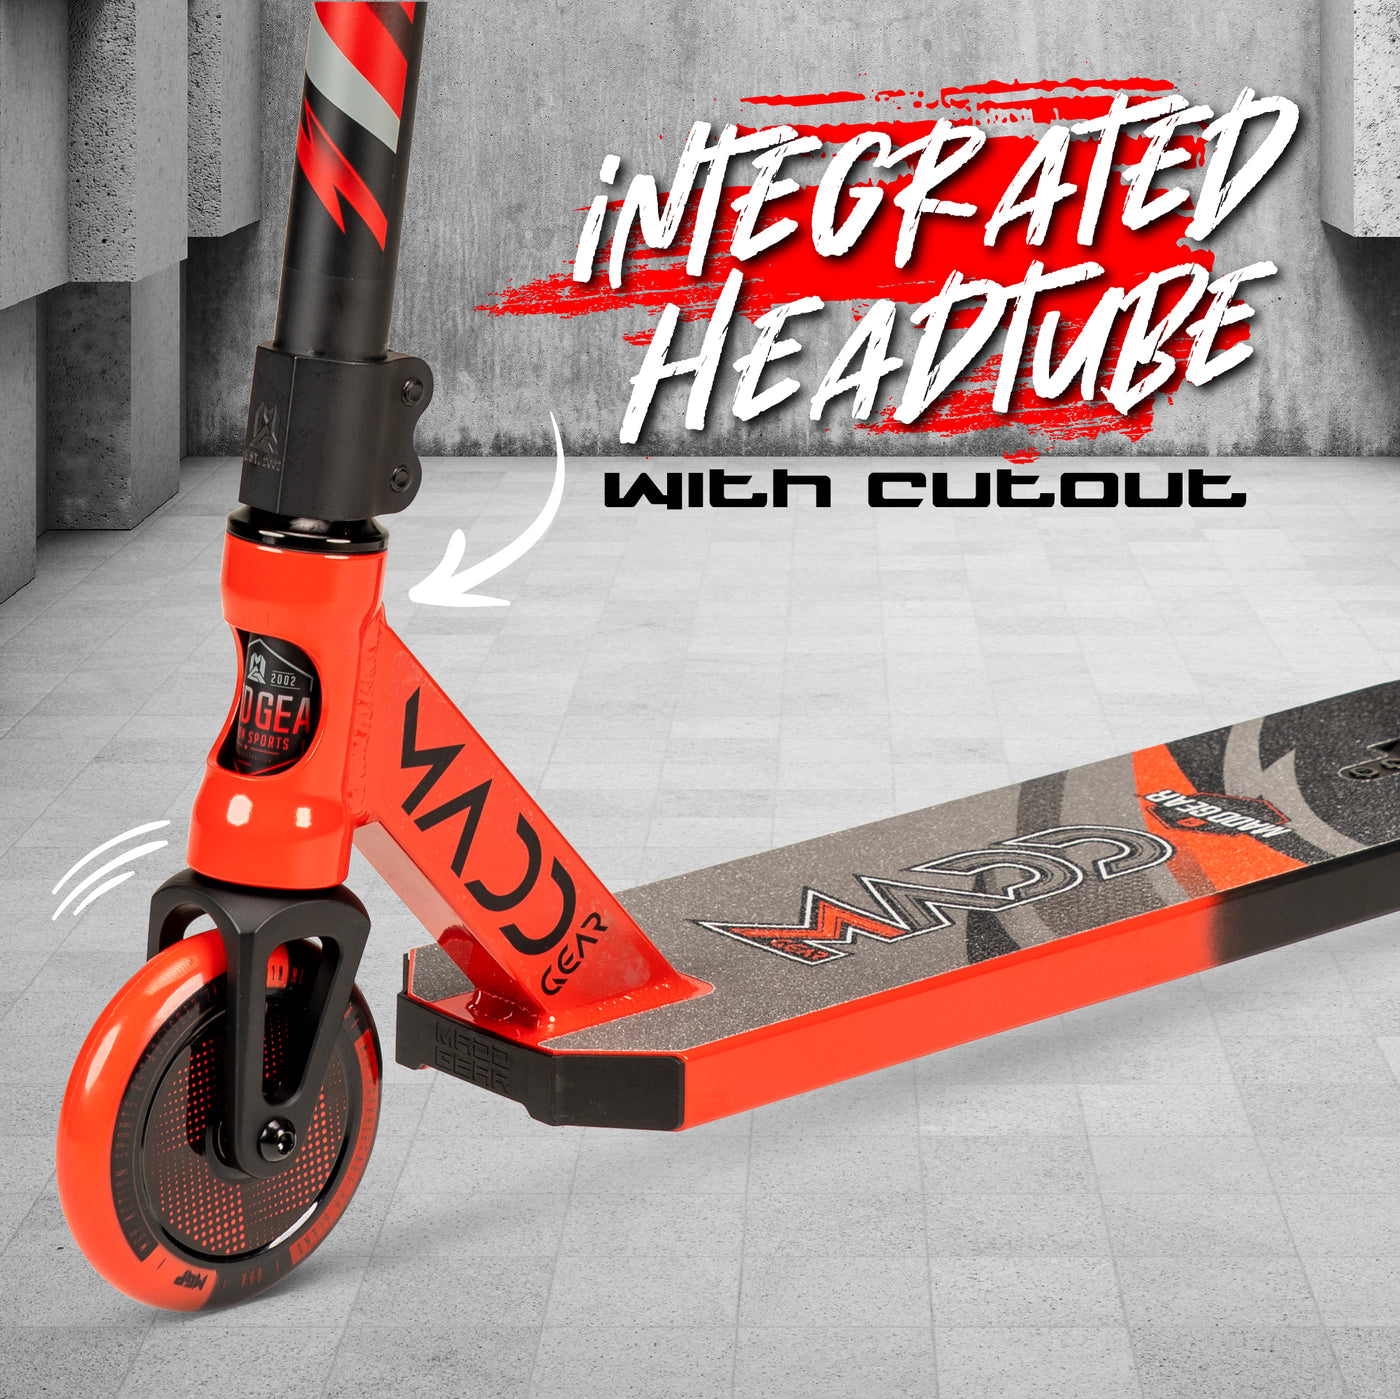 Madd Gear MGP Kick Pro Stunt Scooter Complete High Quality Razor Pro Trick Skate Park Mad Red Black 5" Deck Integrated Headtube with Cutout